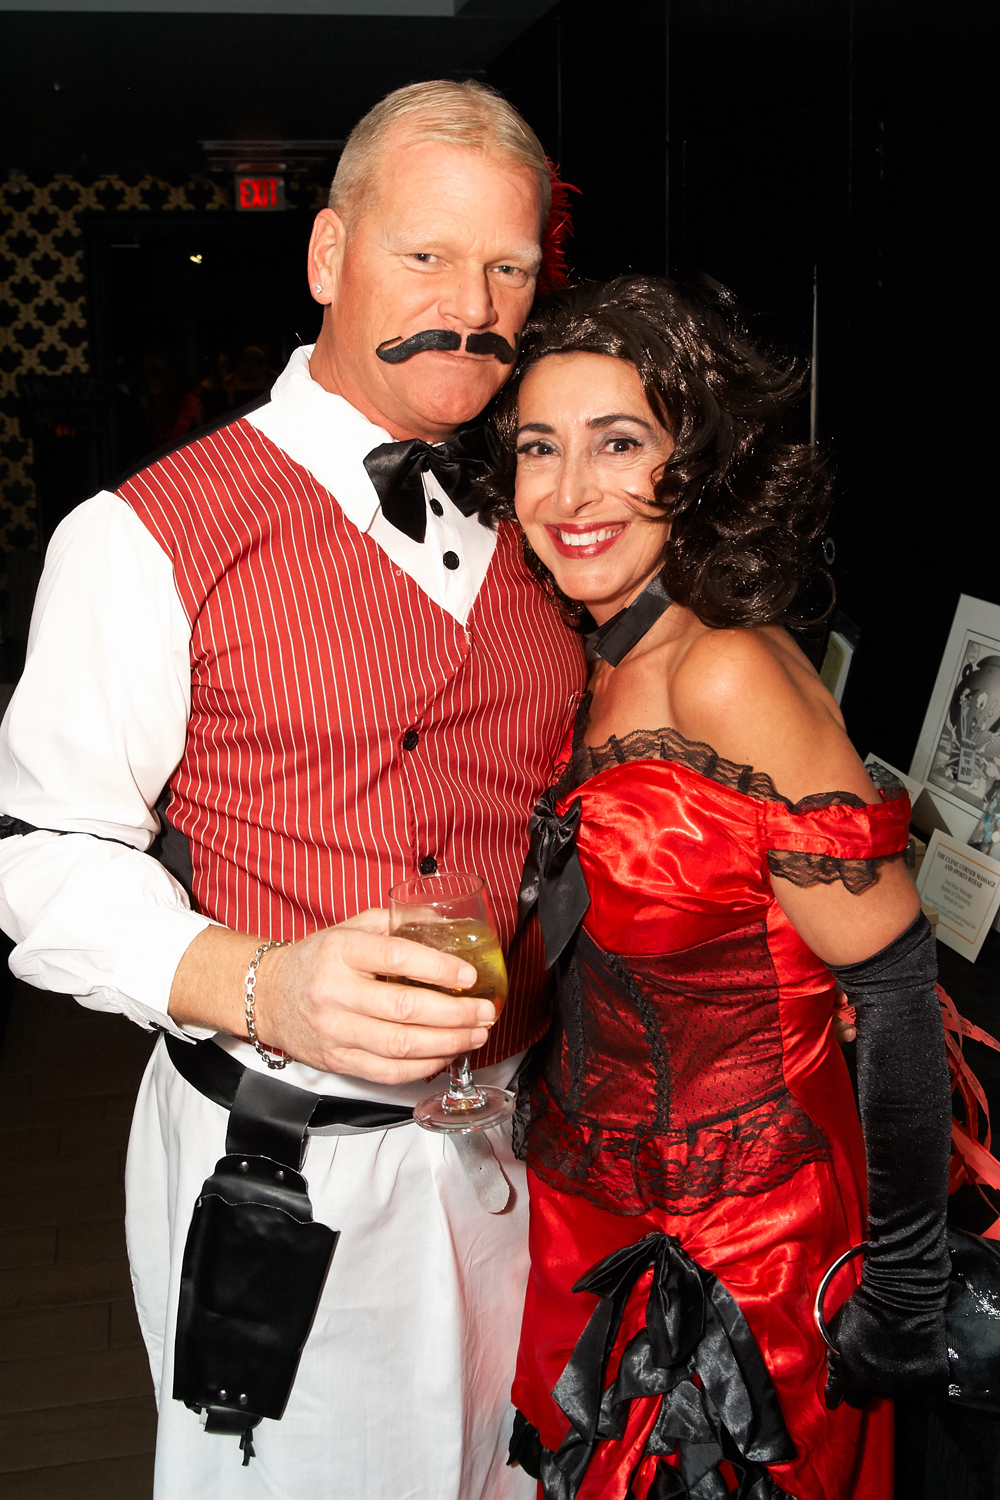 Mike Holmes dressed as an old timely bartender with his wife